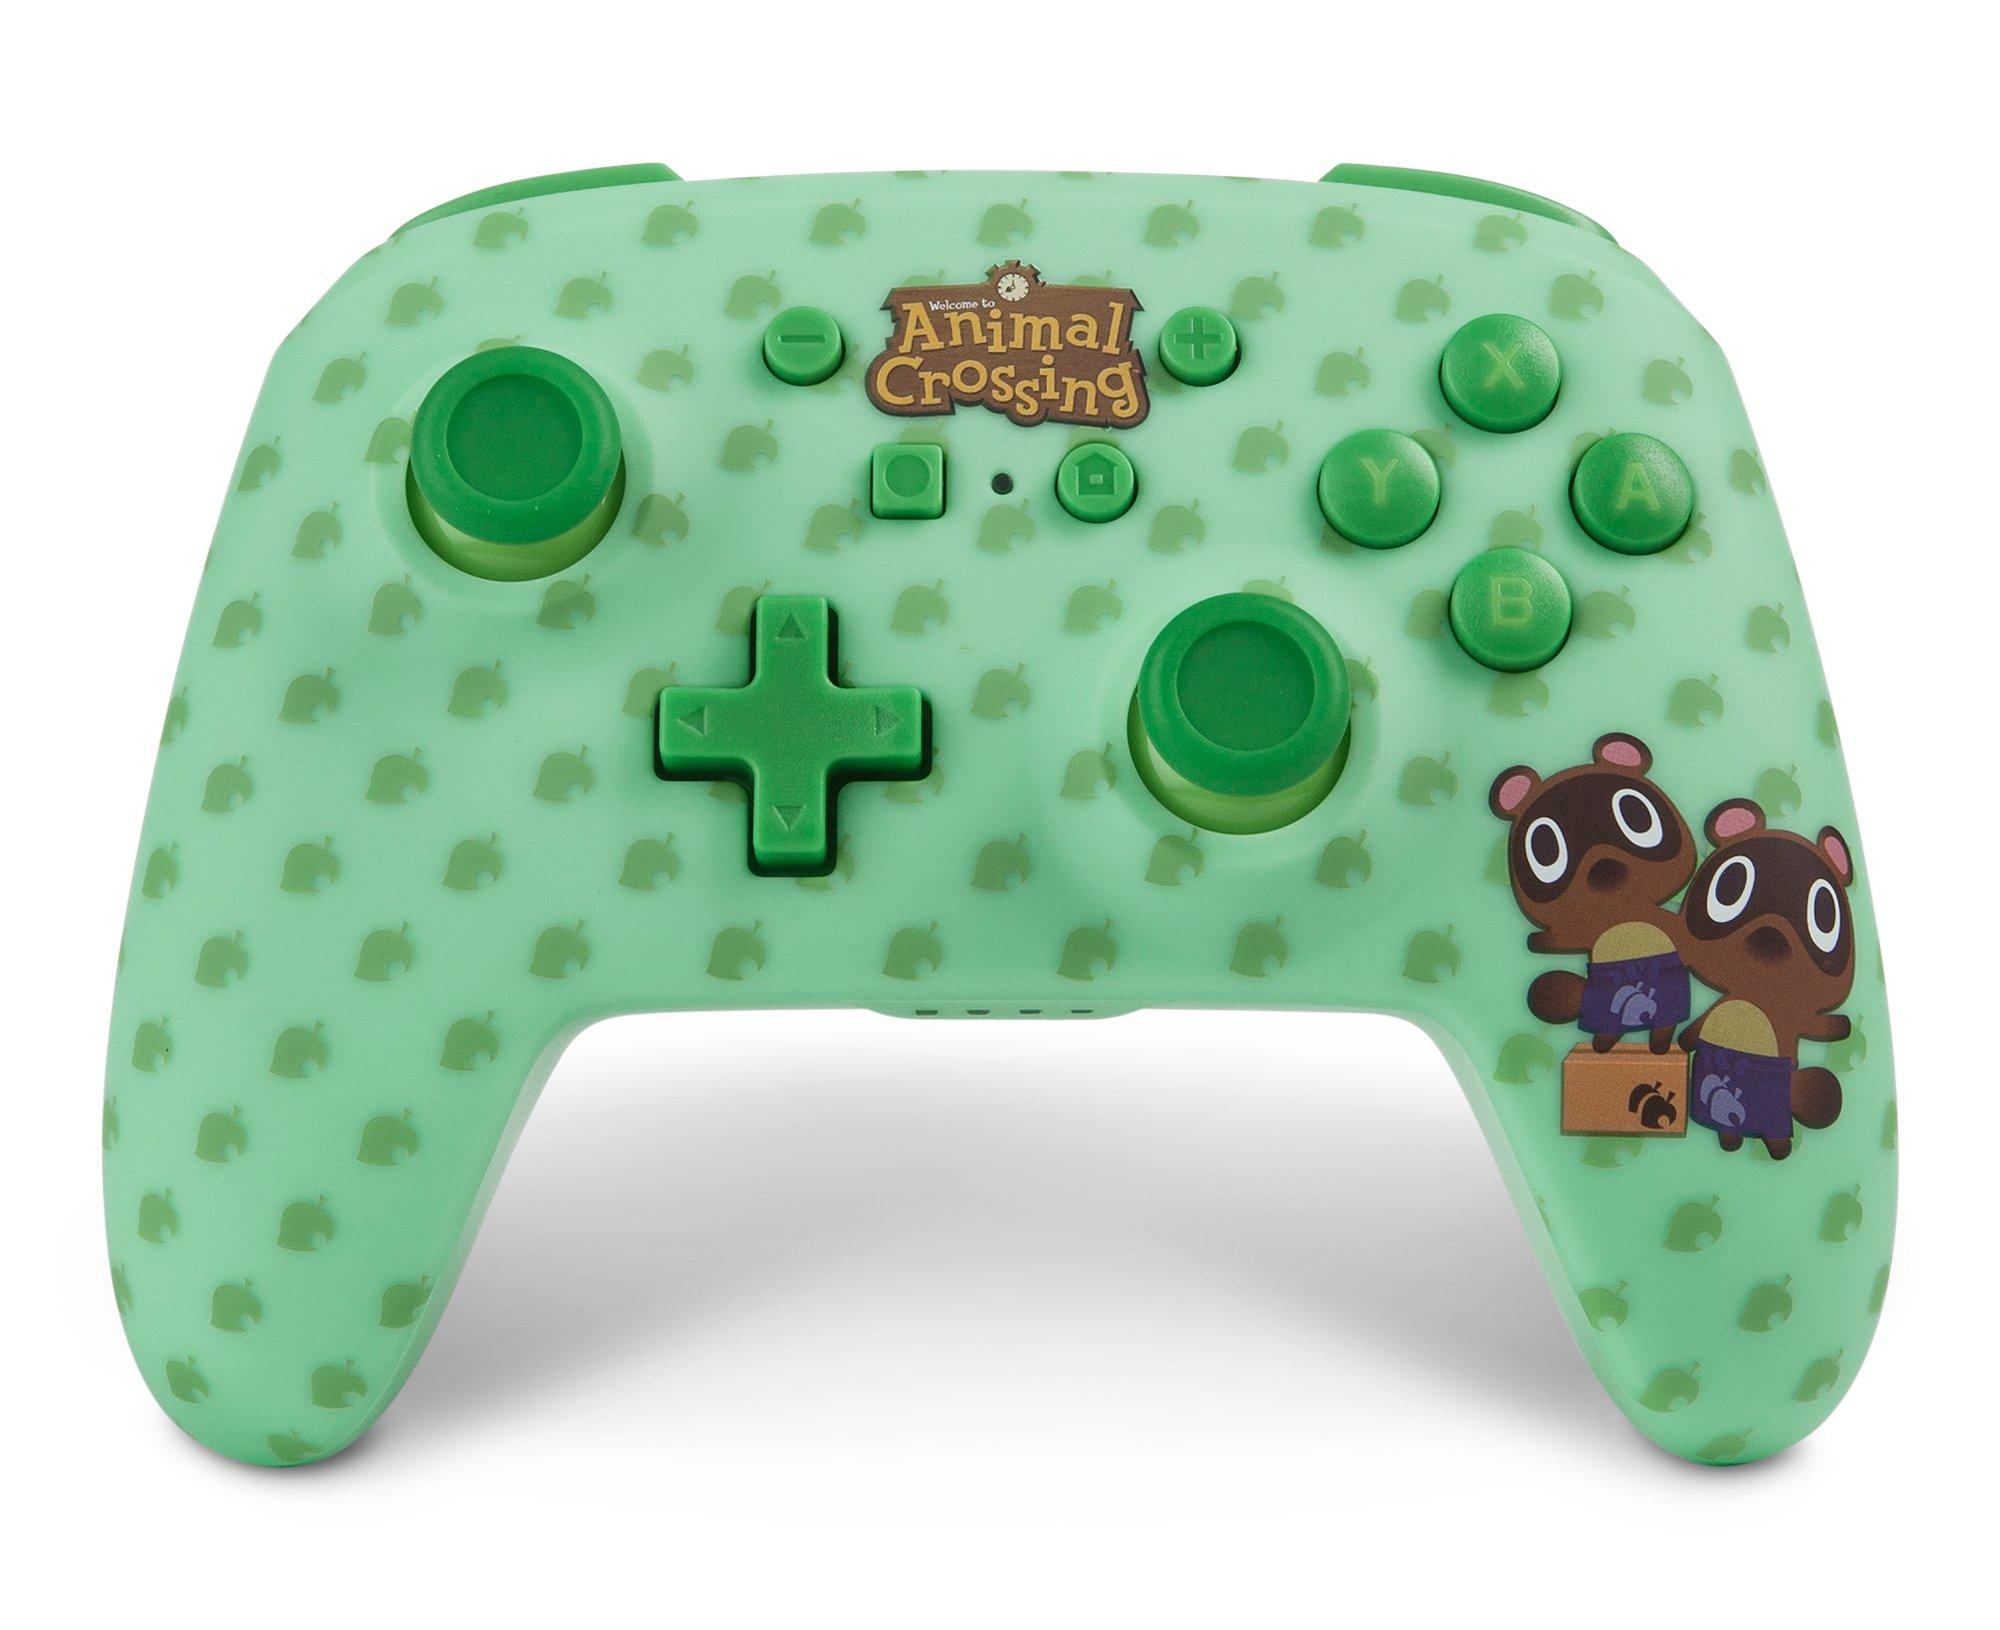 Nintendo Switch Animal Crossing: New Horizons Timmy and Tommy Nook Enhanced Wireless Controller